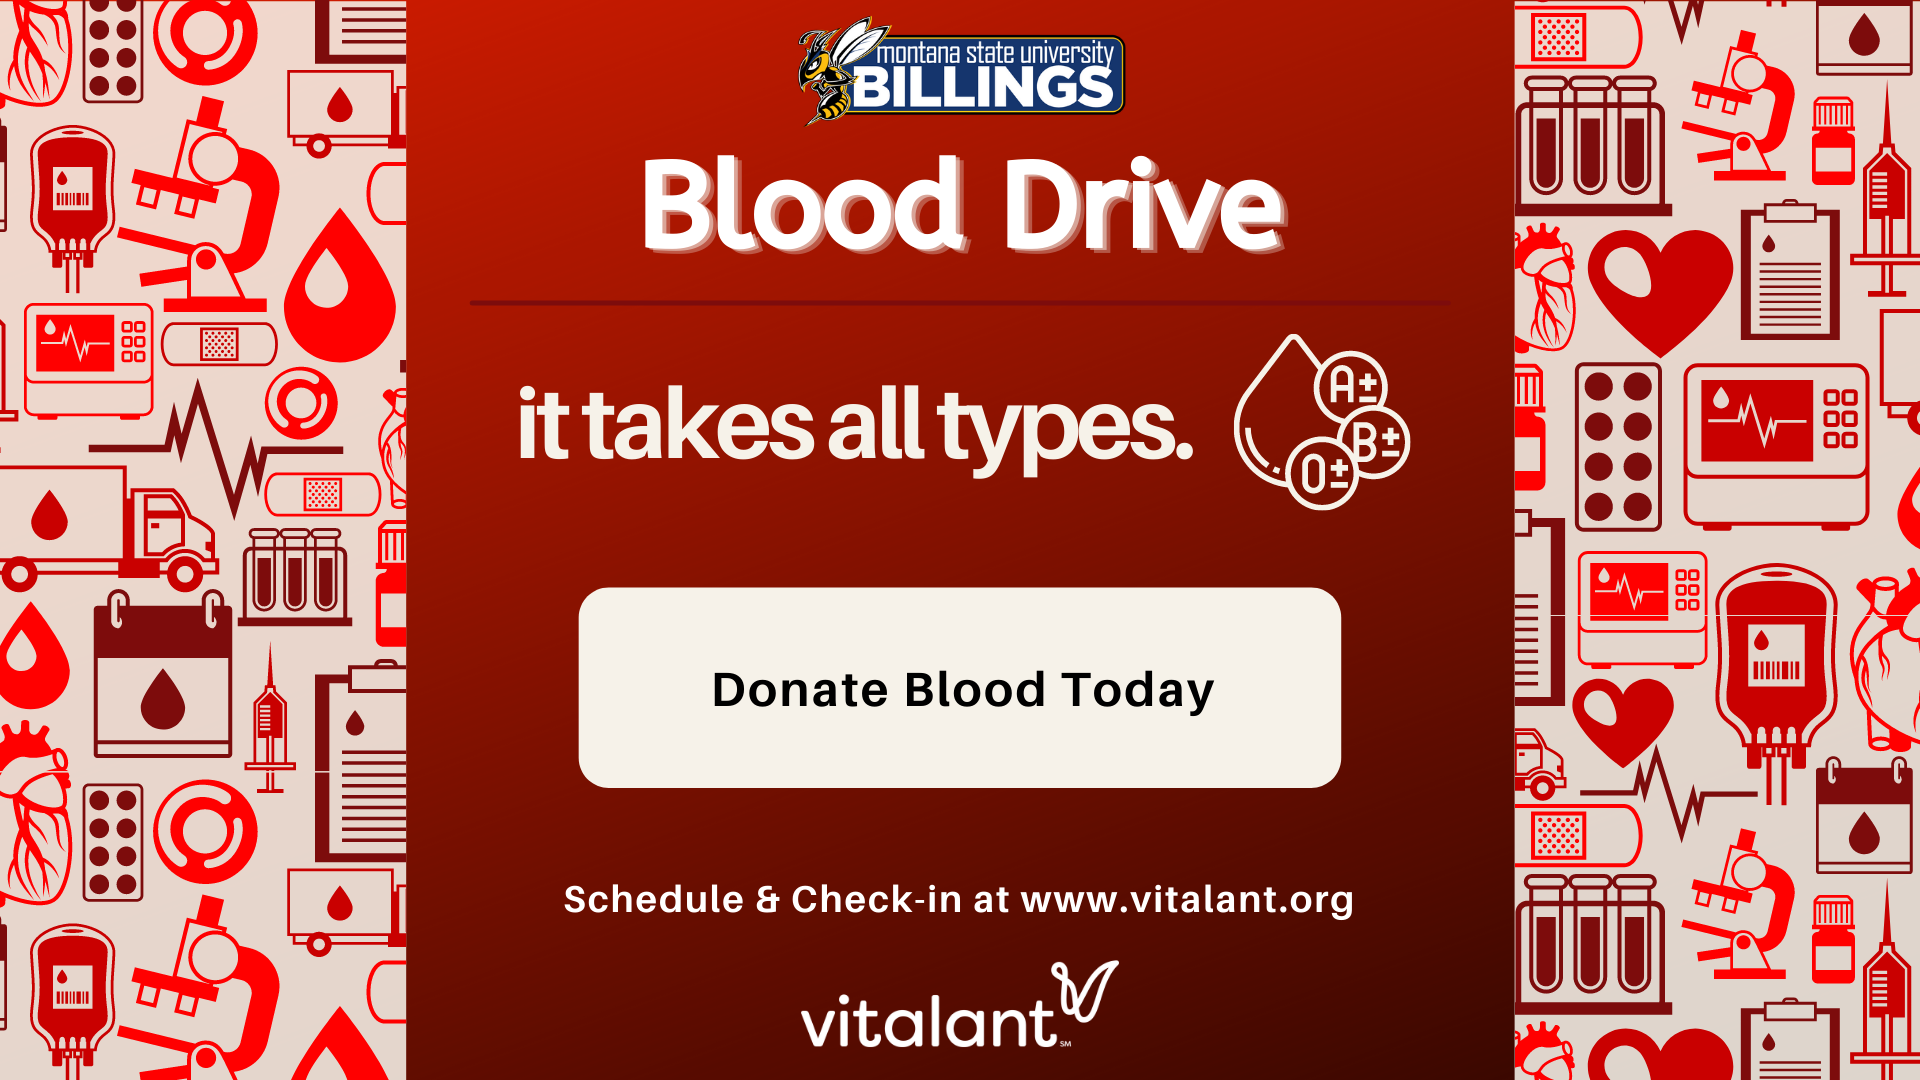 Blood Drive. It takes all types. Donate today. Schedule and Check-in at www.vitalant.org